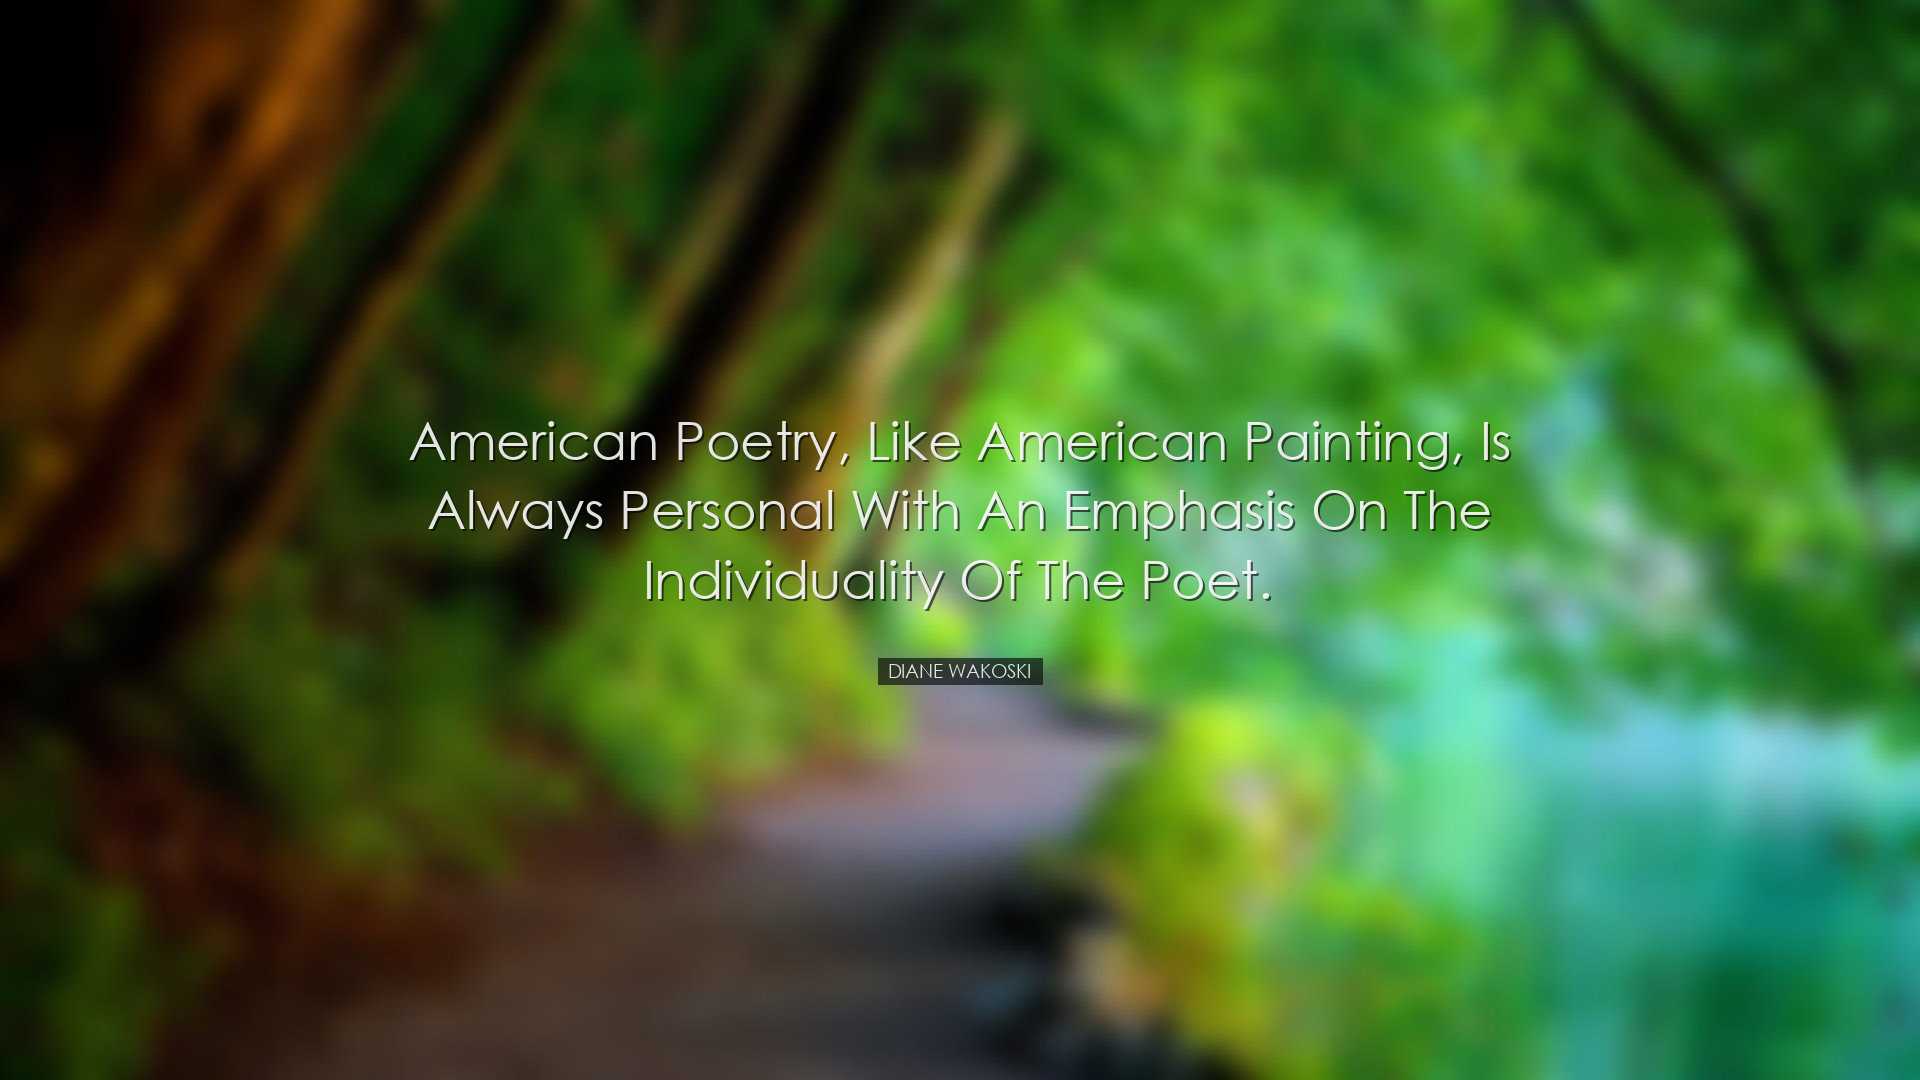 American poetry, like American painting, is always personal with a